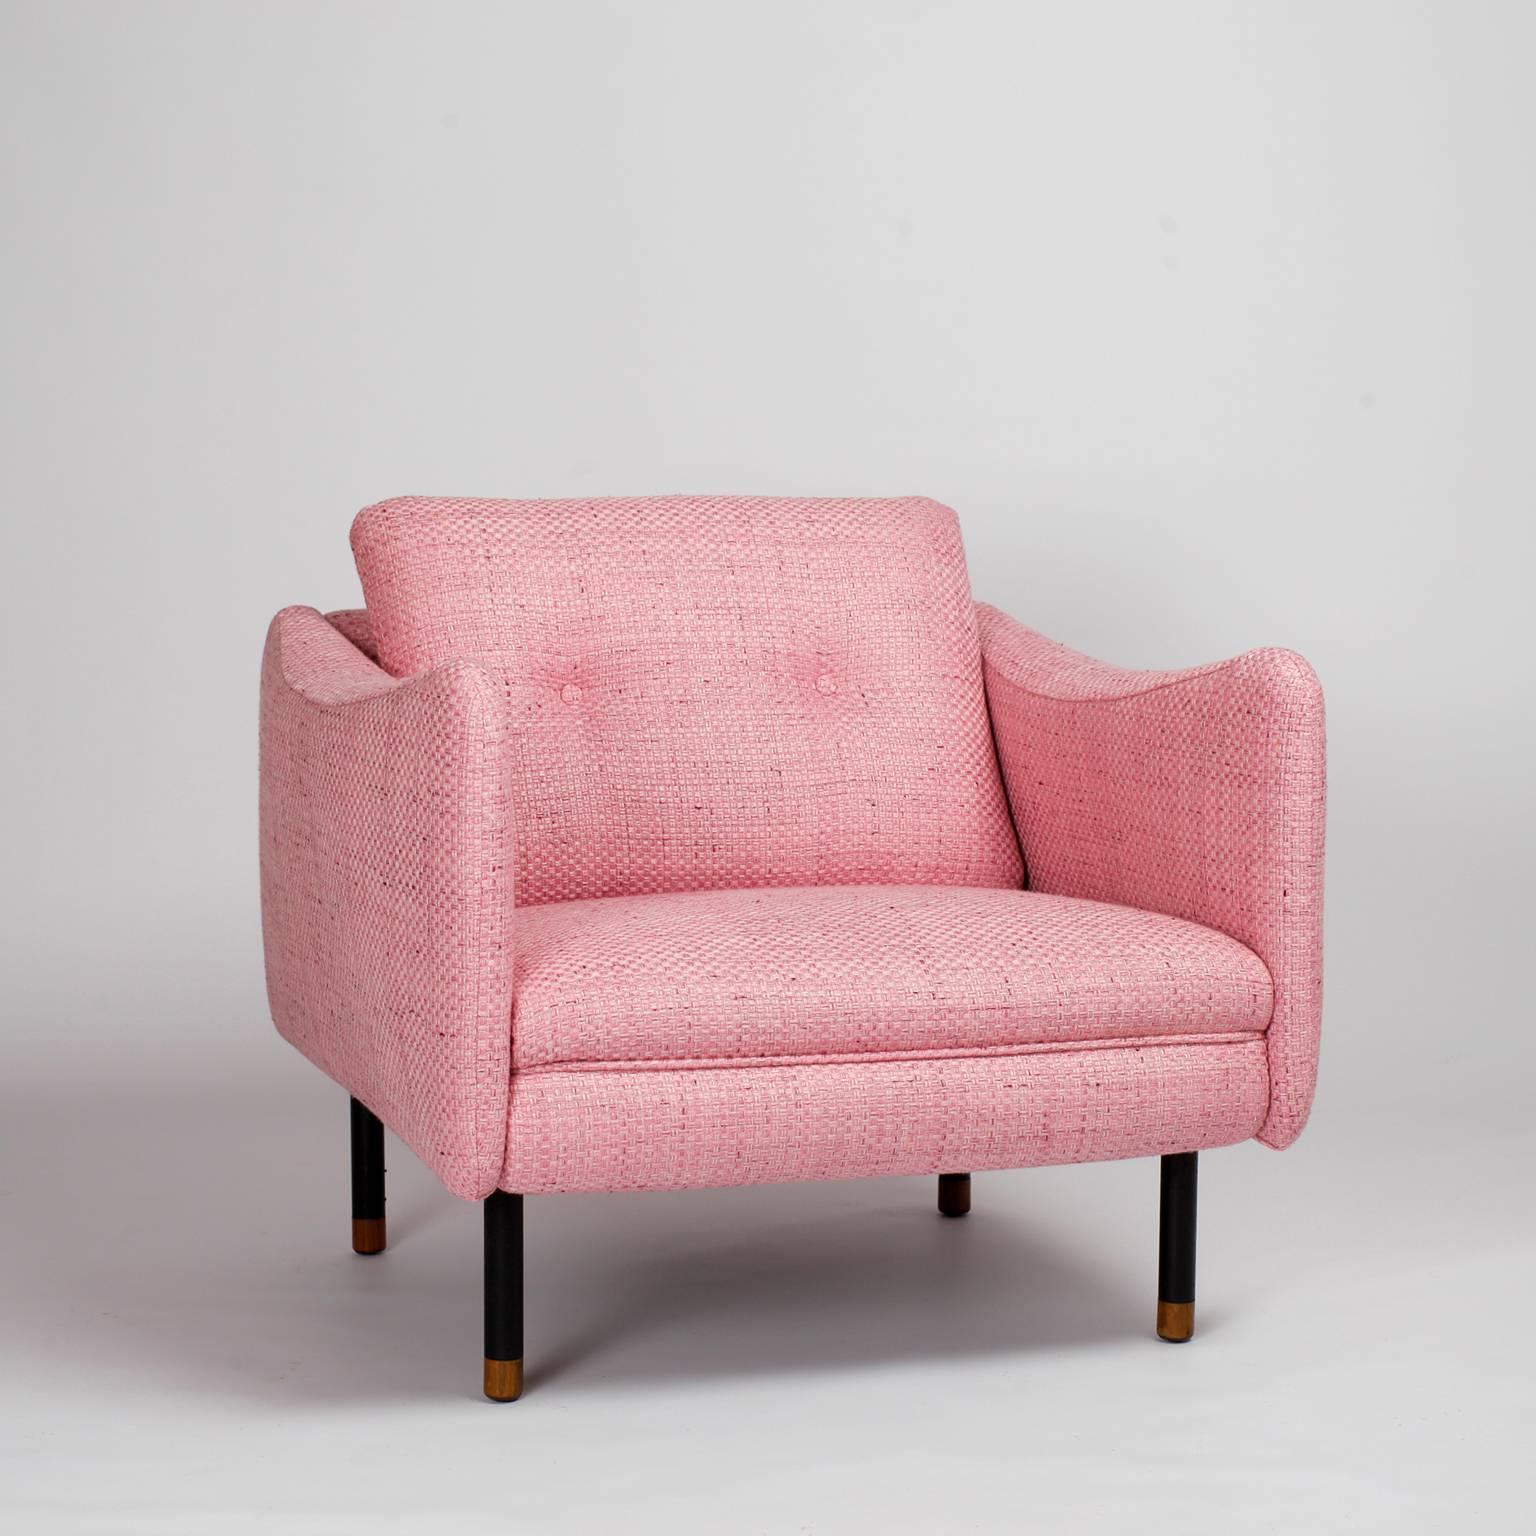 Nice Michel Mortier Teckel or SF116 armchair for Steiner designed in 1963, newly upholstered in beautiful pink Pierre Frey fabric.
The armchair foot are made with wood and black lacquered metal.
The metal label of the manufacturer is present on the